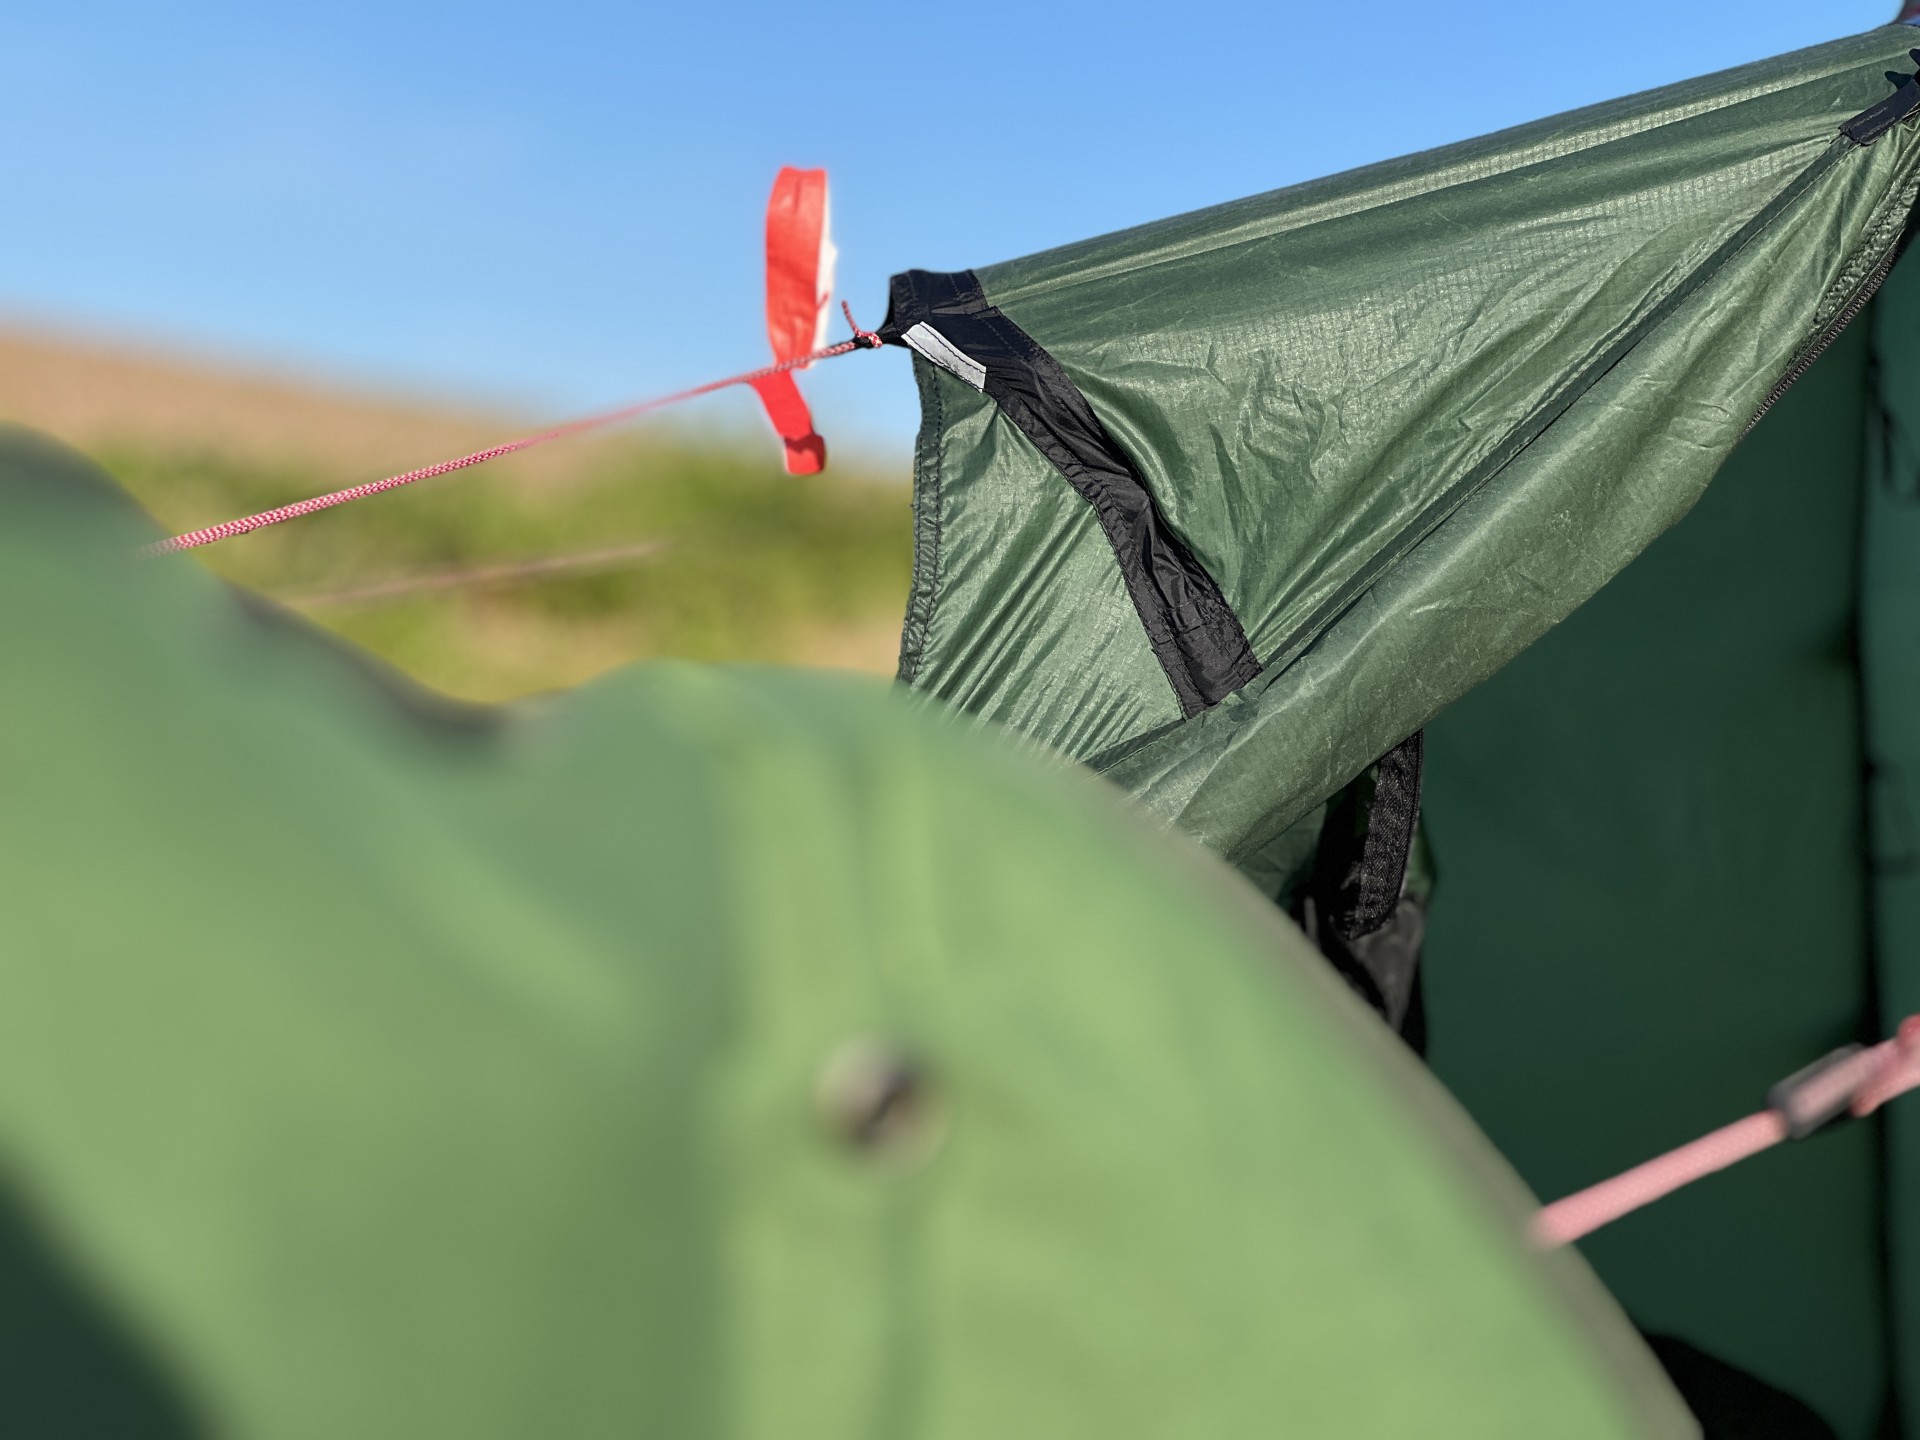 Only the best Hilleberg tents on NOMAD Sea Kayaking wild camp weekends.